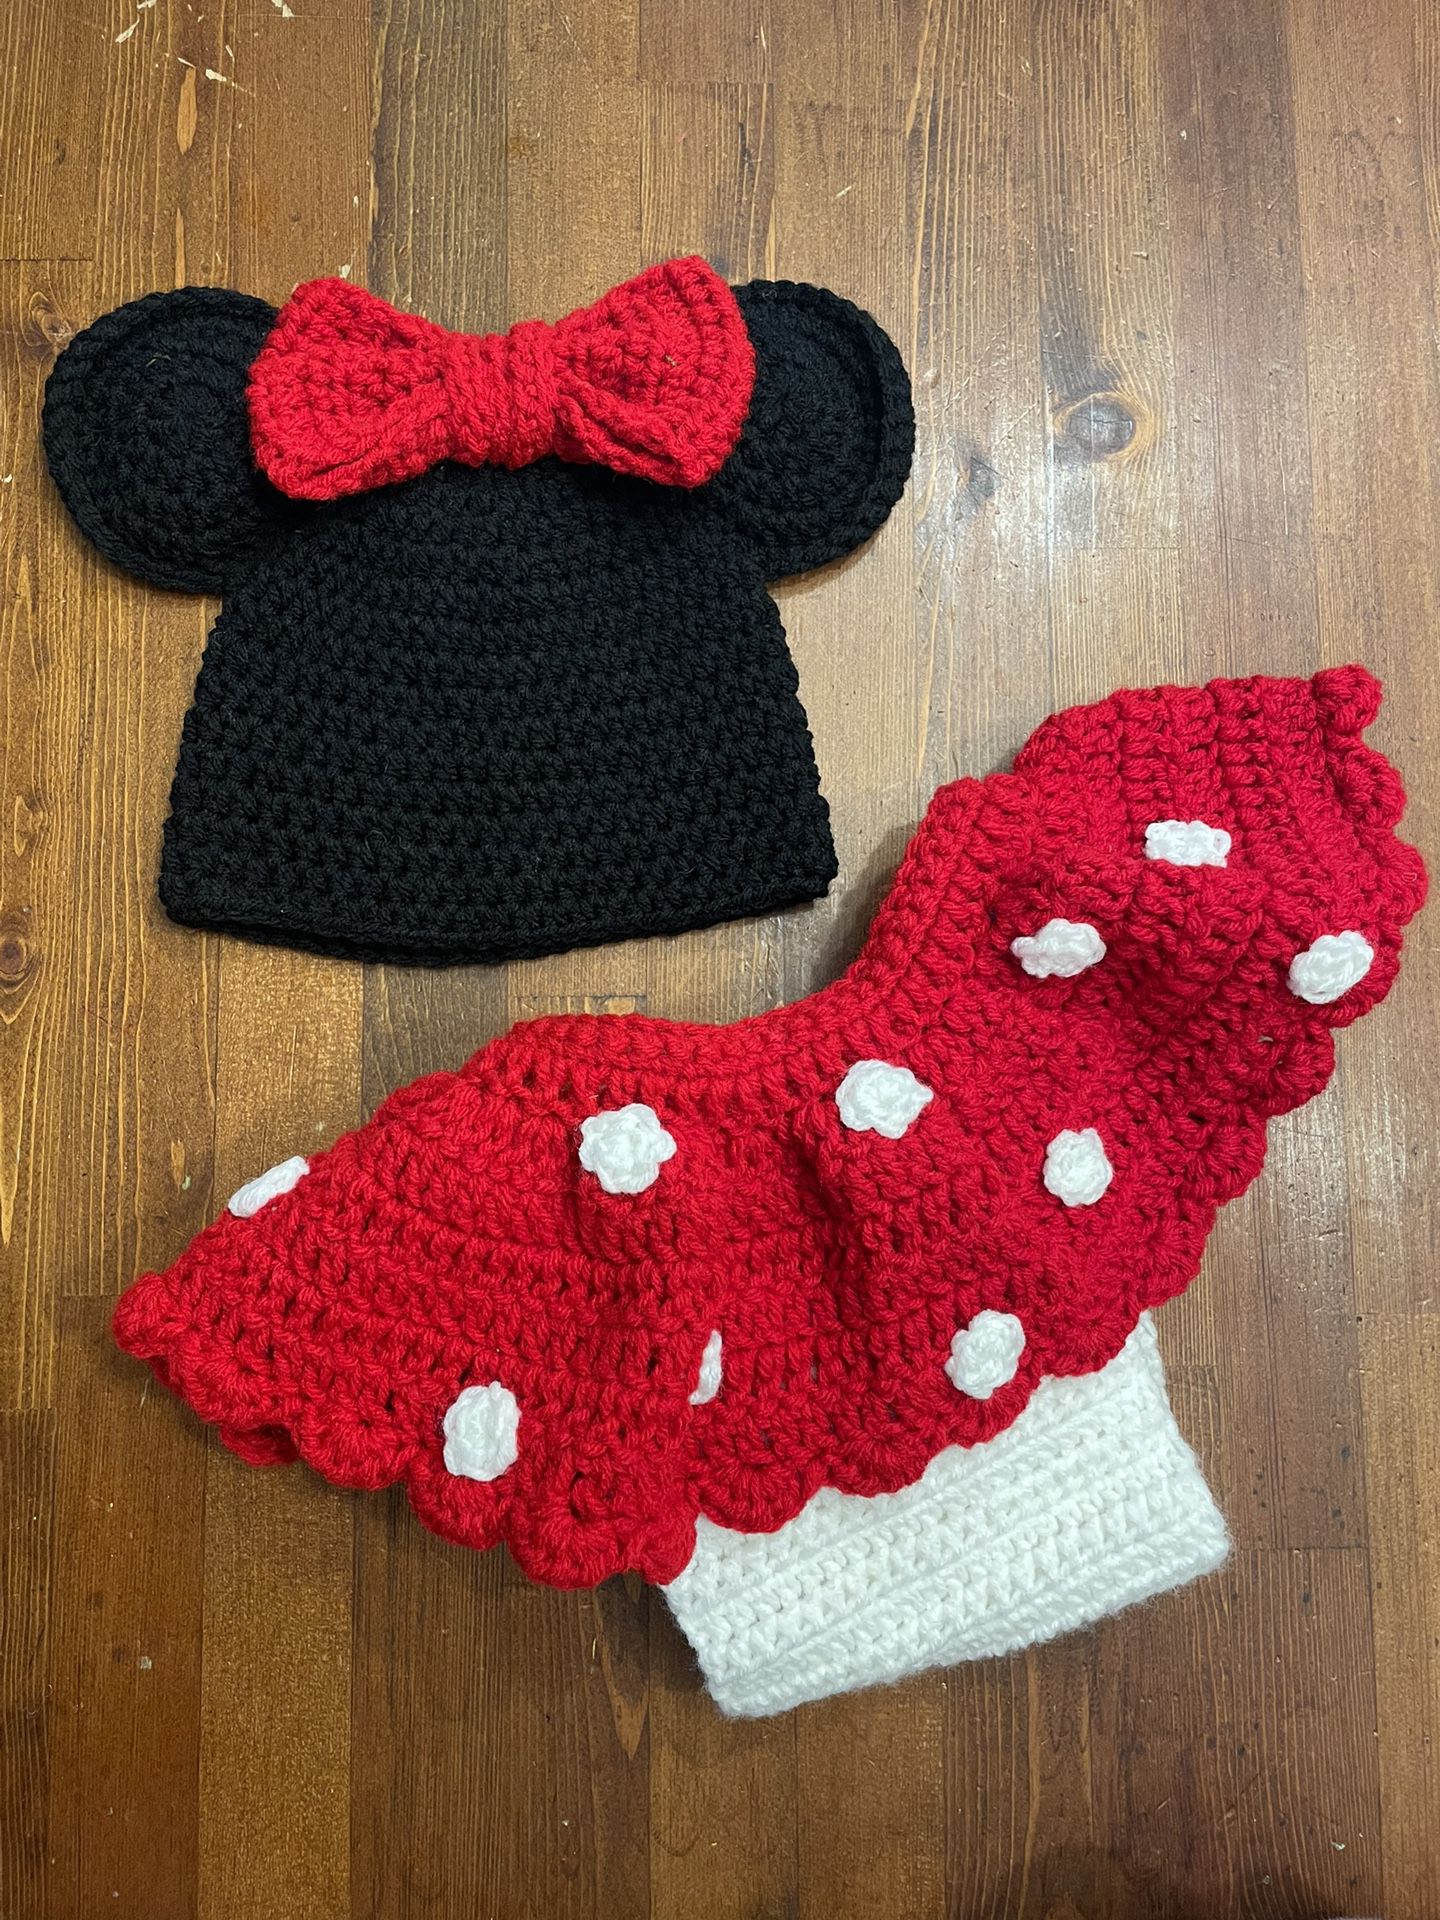  Baby Mini Mouse inspired crochet outfit or costume